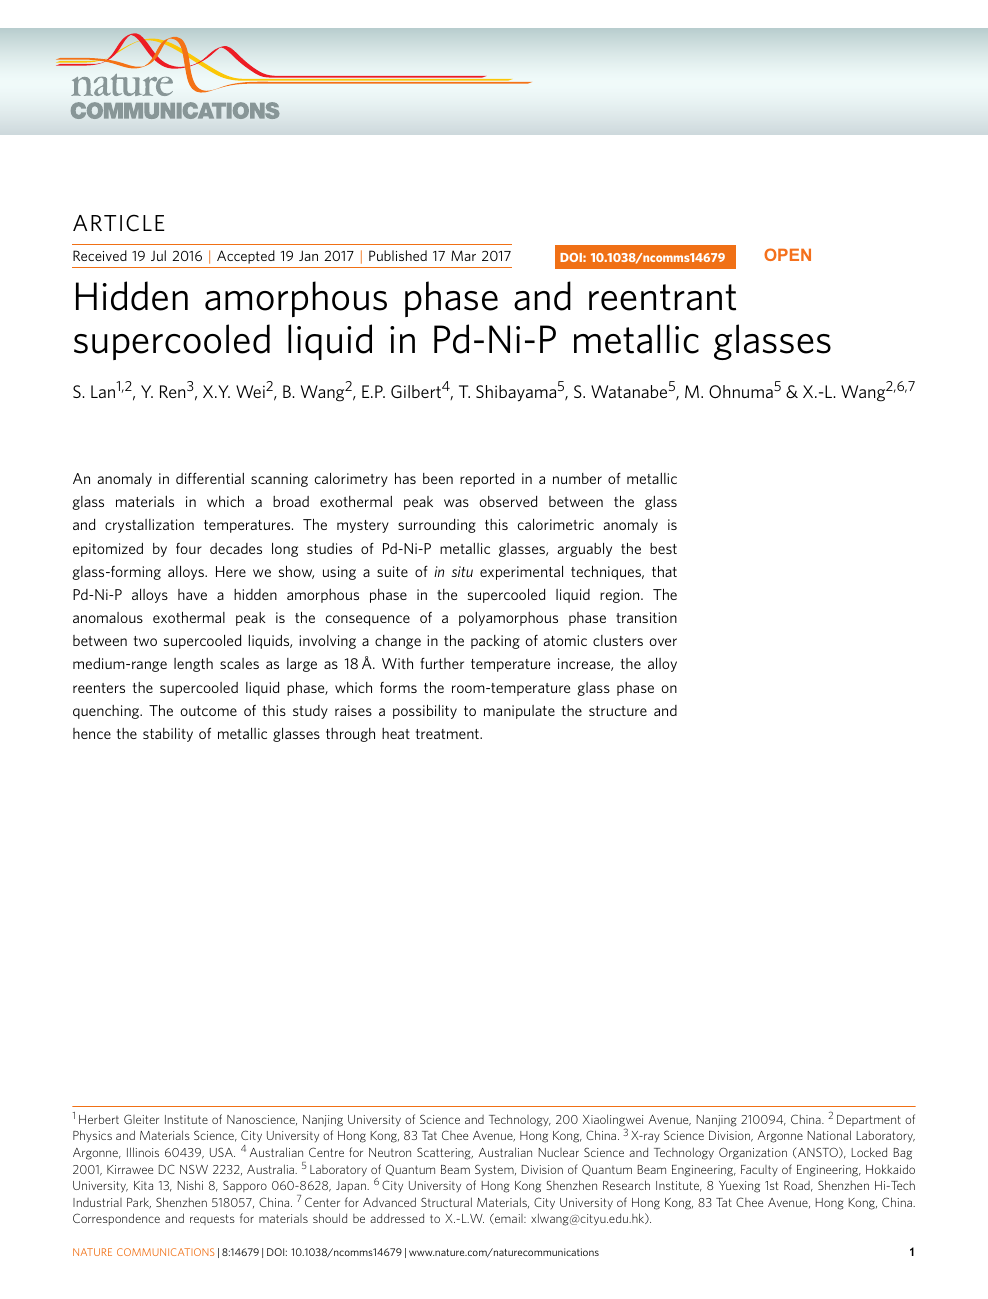 Hidden Amorphous Phase And Reentrant Supercooled Liquid In Pd Ni P Metallic Glasses Topic Of Research Paper In Nano Technology Download Scholarly Article Pdf And Read For Free On Cyberleninka Open Science Hub